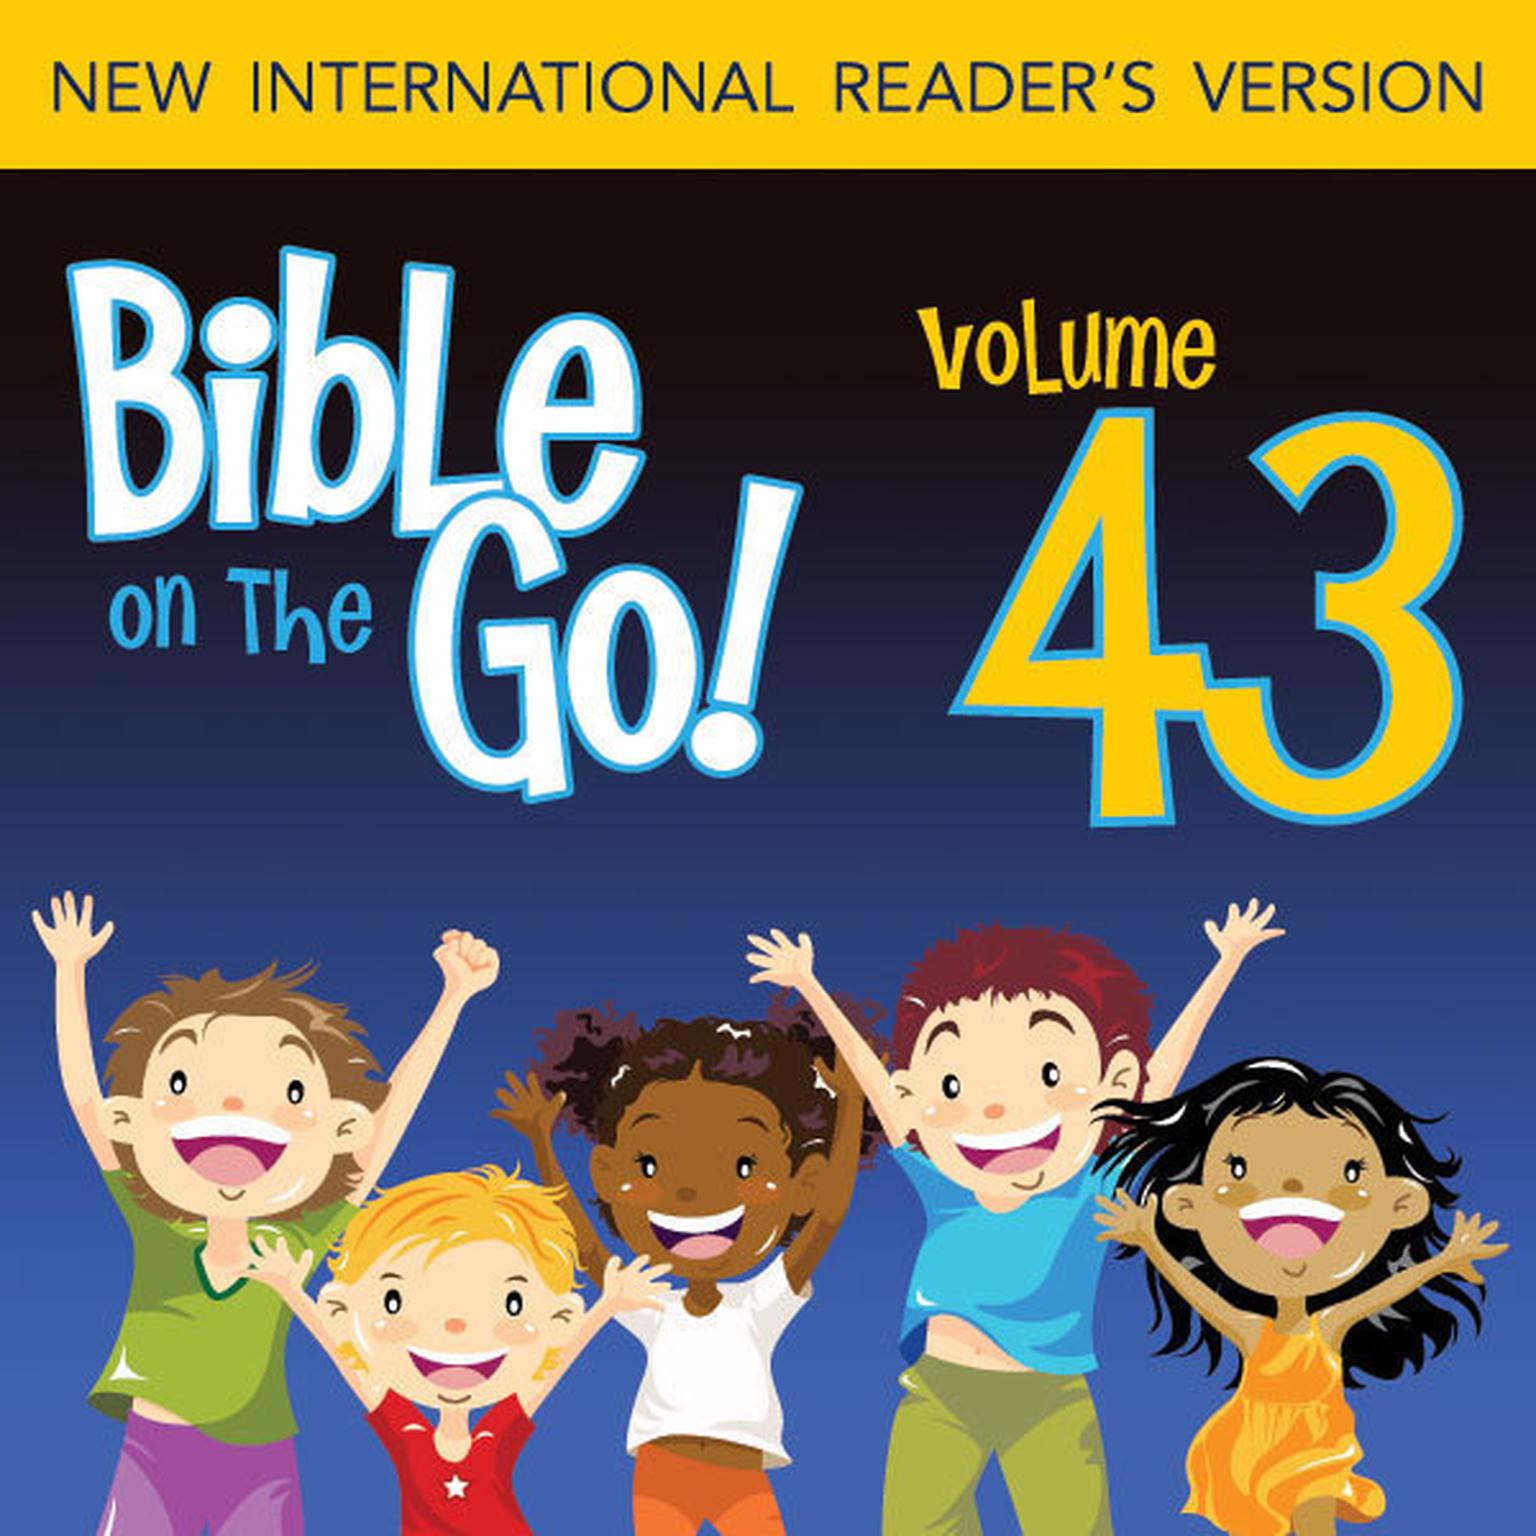 Bible on the Go Audio Bible - New International Readers Version, NIrV: Vol. 43 Pentecost and the Acts of the Apostles; The Early Believers (Acts 2-8) Audiobook, by Zondervan